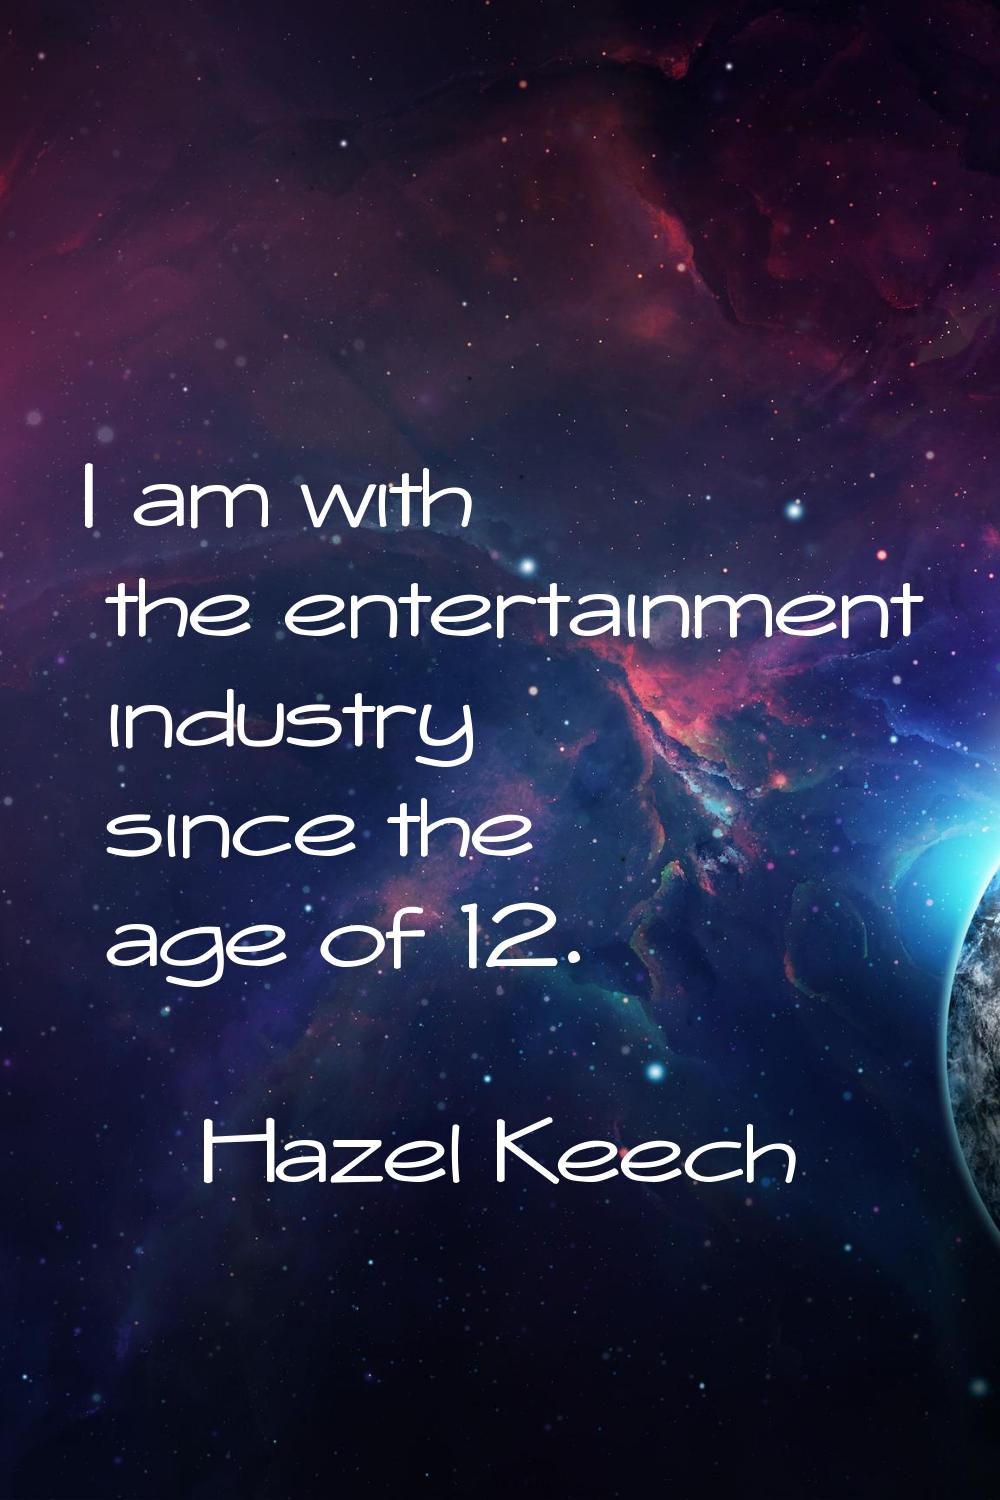 I am with the entertainment industry since the age of 12.